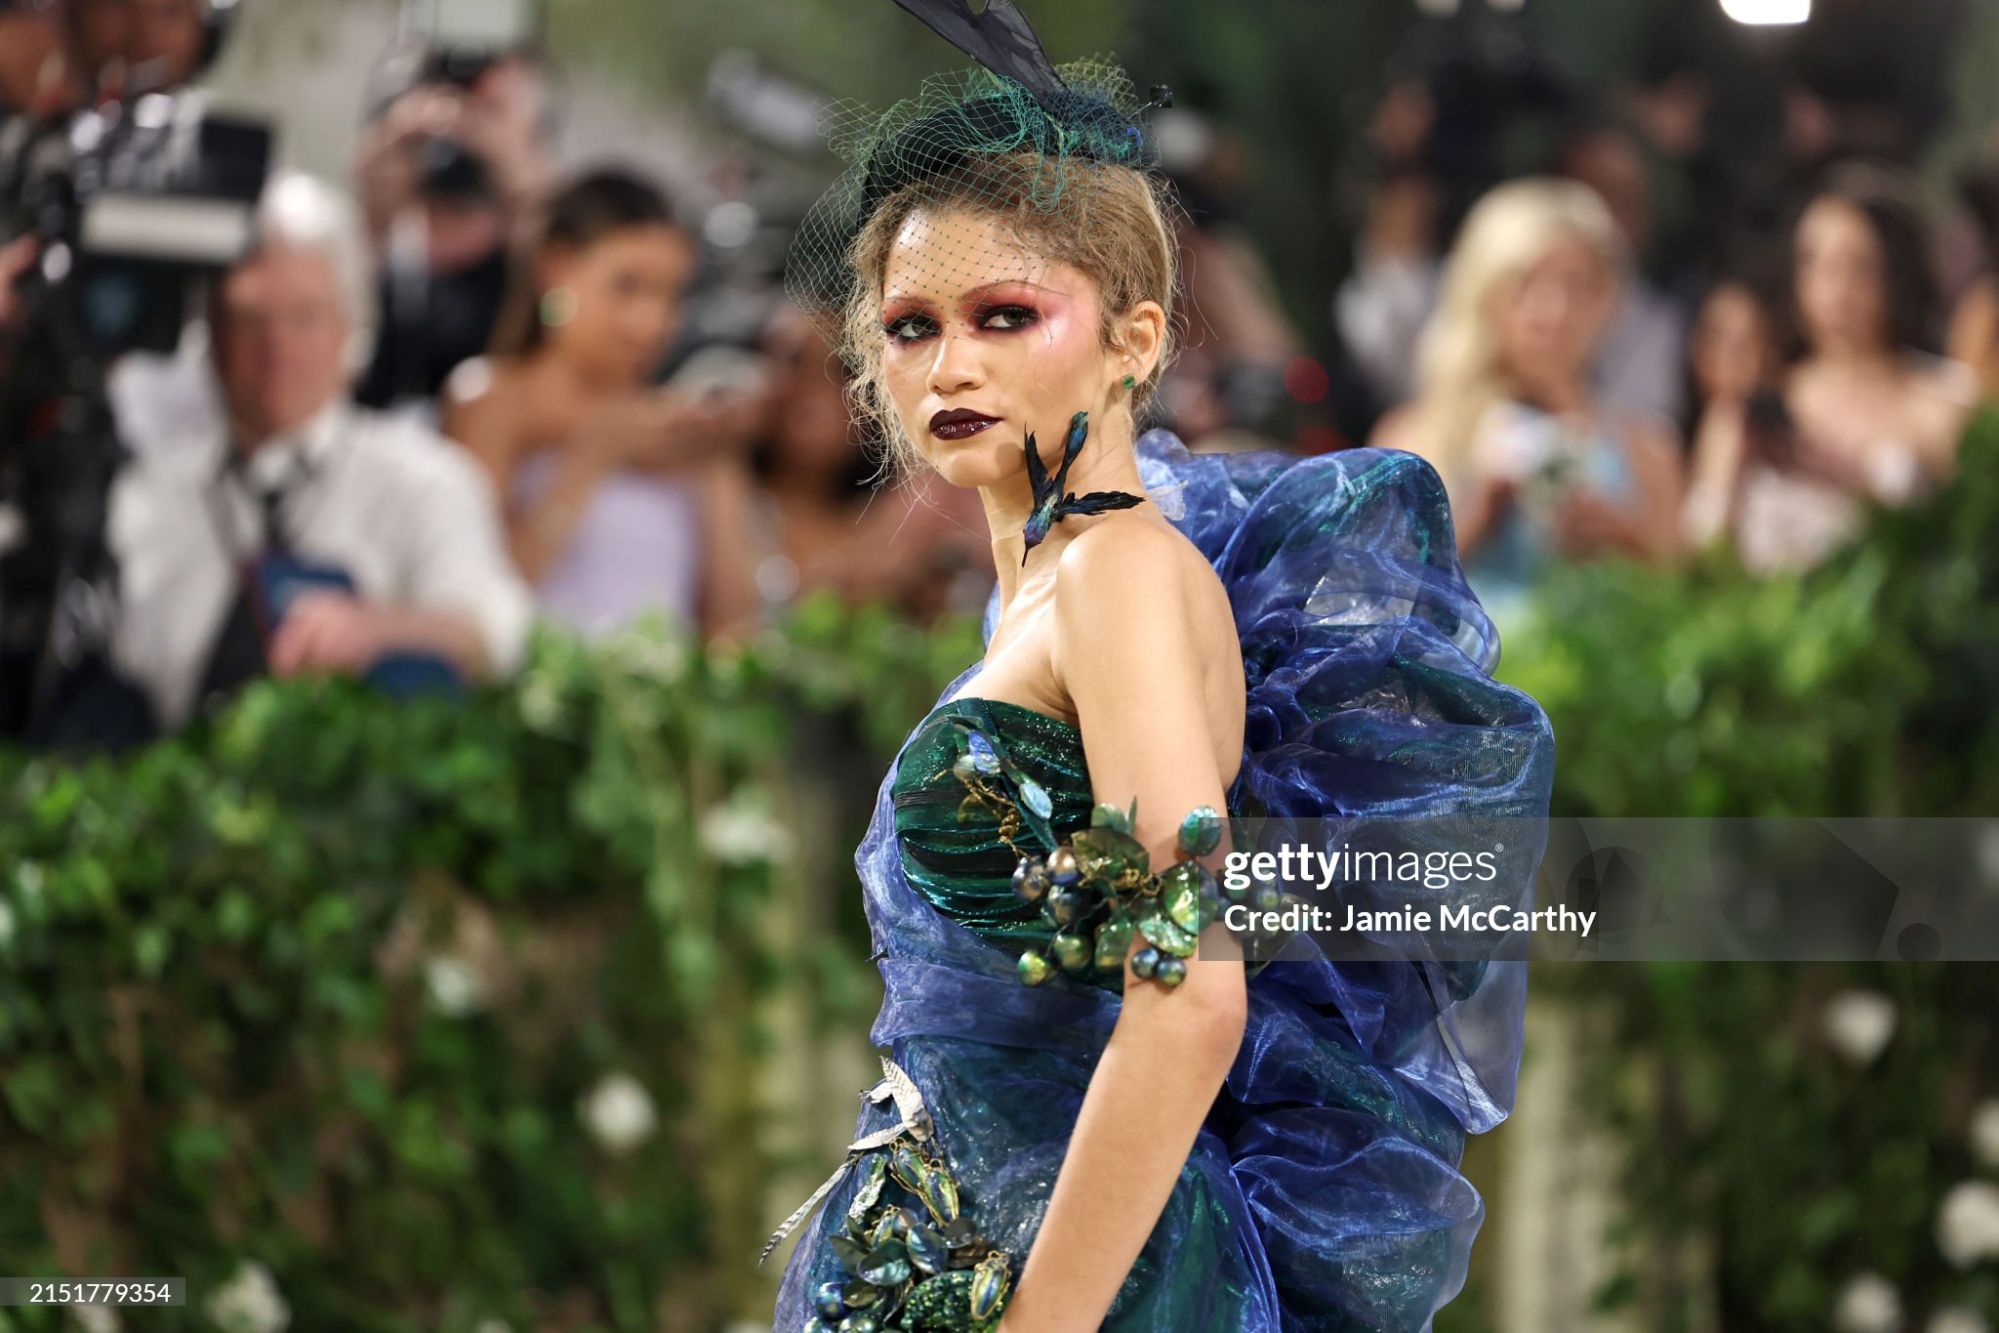 gettyimages-2151779354-2048x2048.jpg